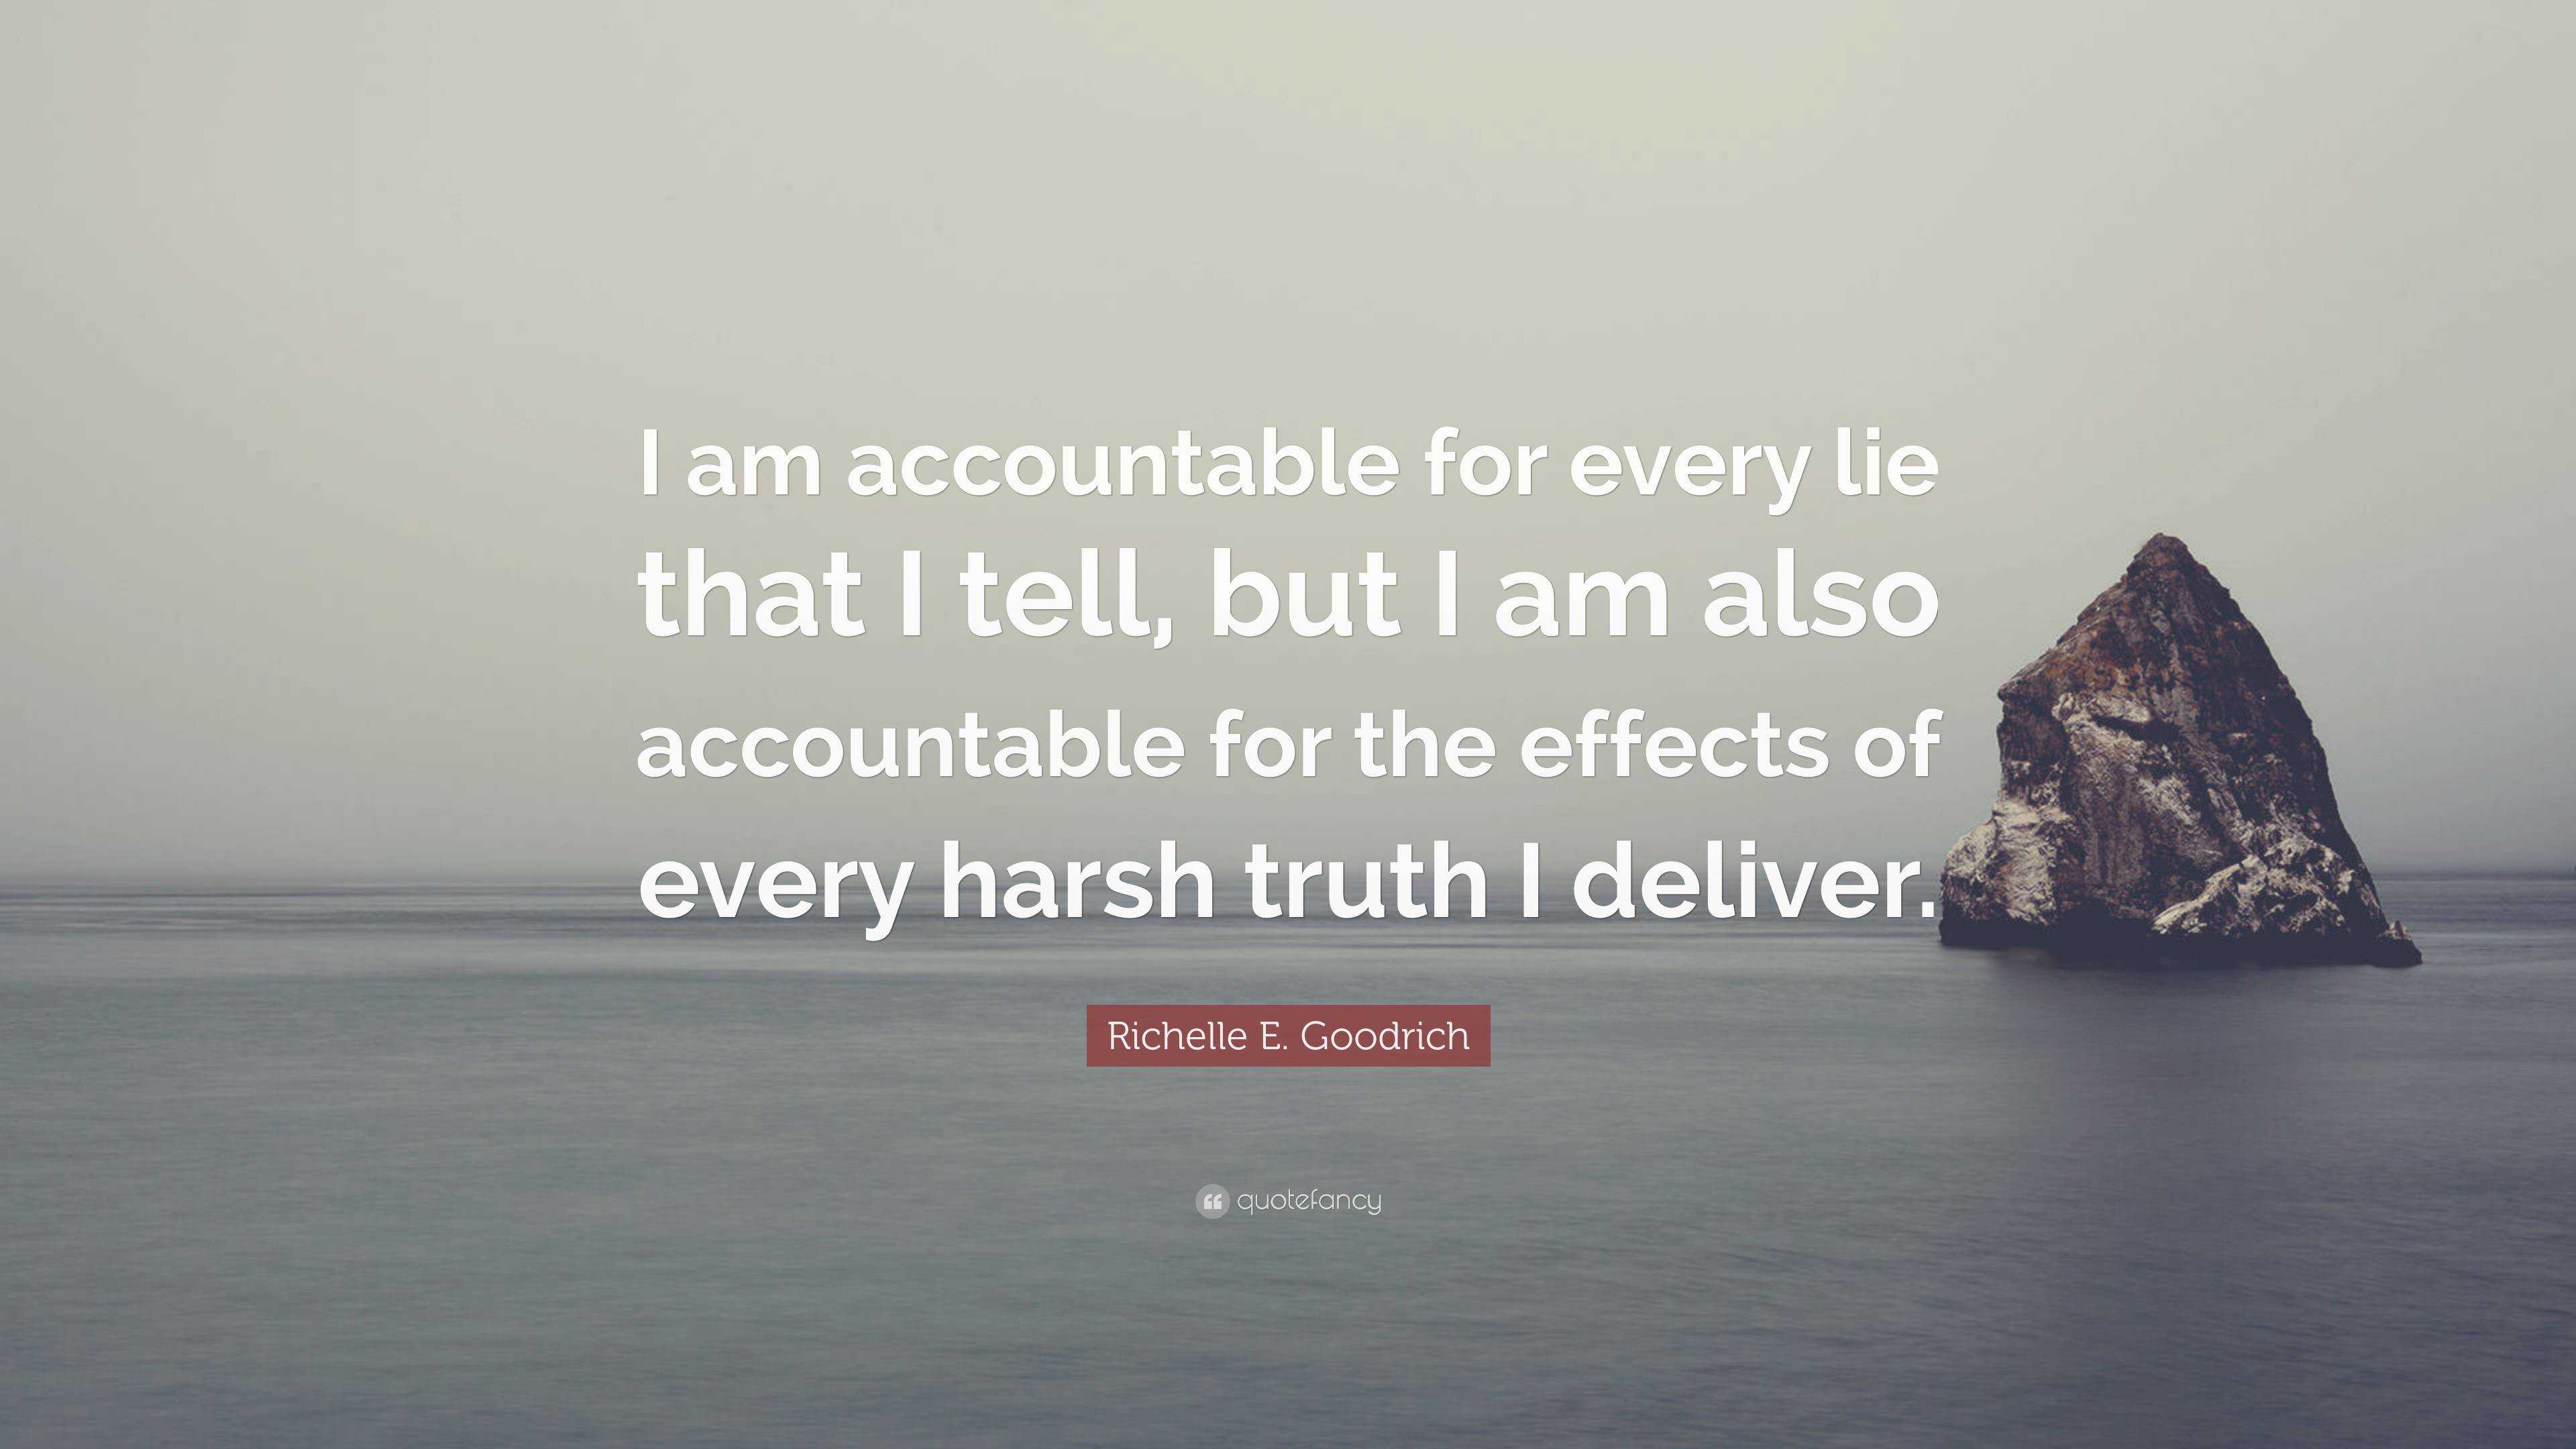 Richelle E. Goodrich Quote: “I am accountable for every lie that I tell ...